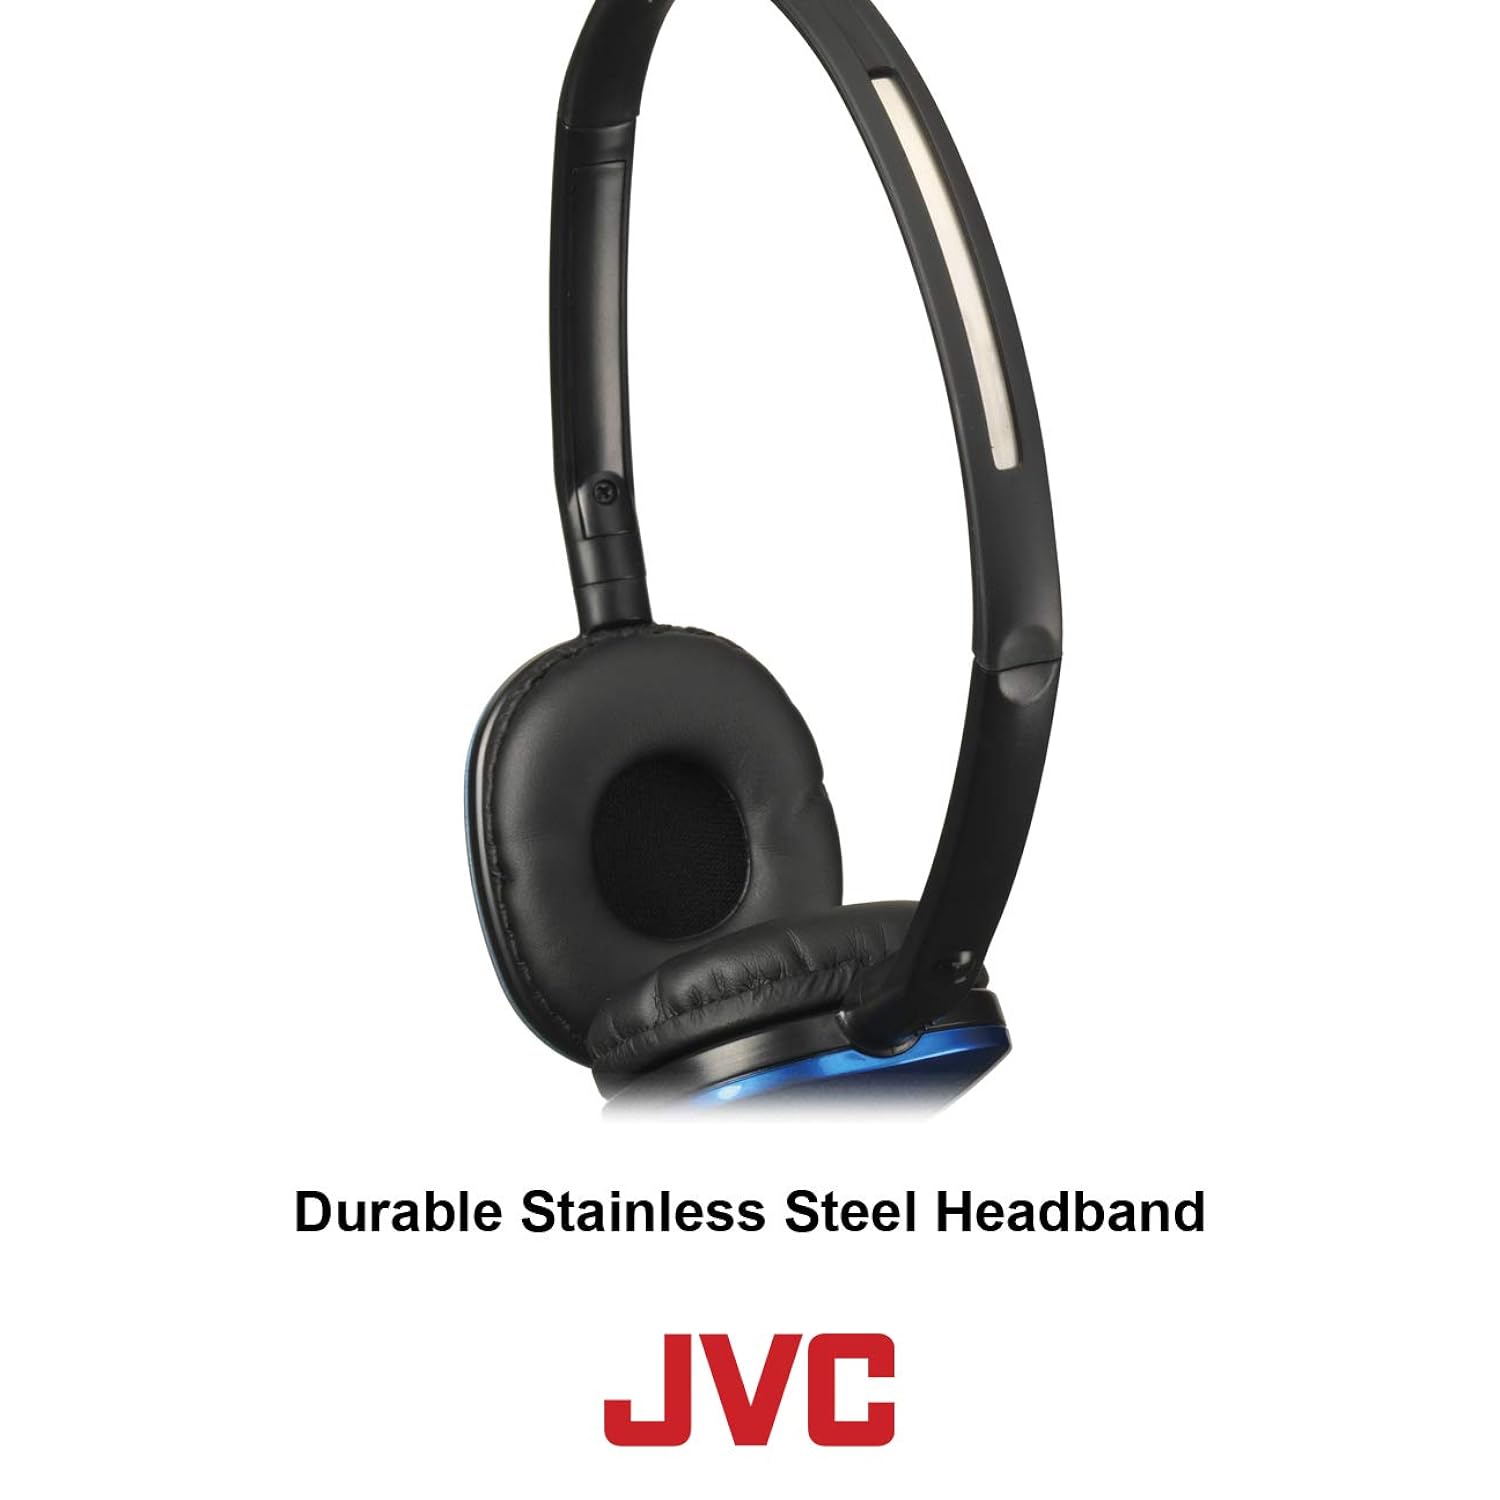 JVC Kenwood JVC Violet Flat and Foldable Colorful Flats On Ear Headphone with 3.94 foot Gold Plated Phone Slim Plug HAS160V